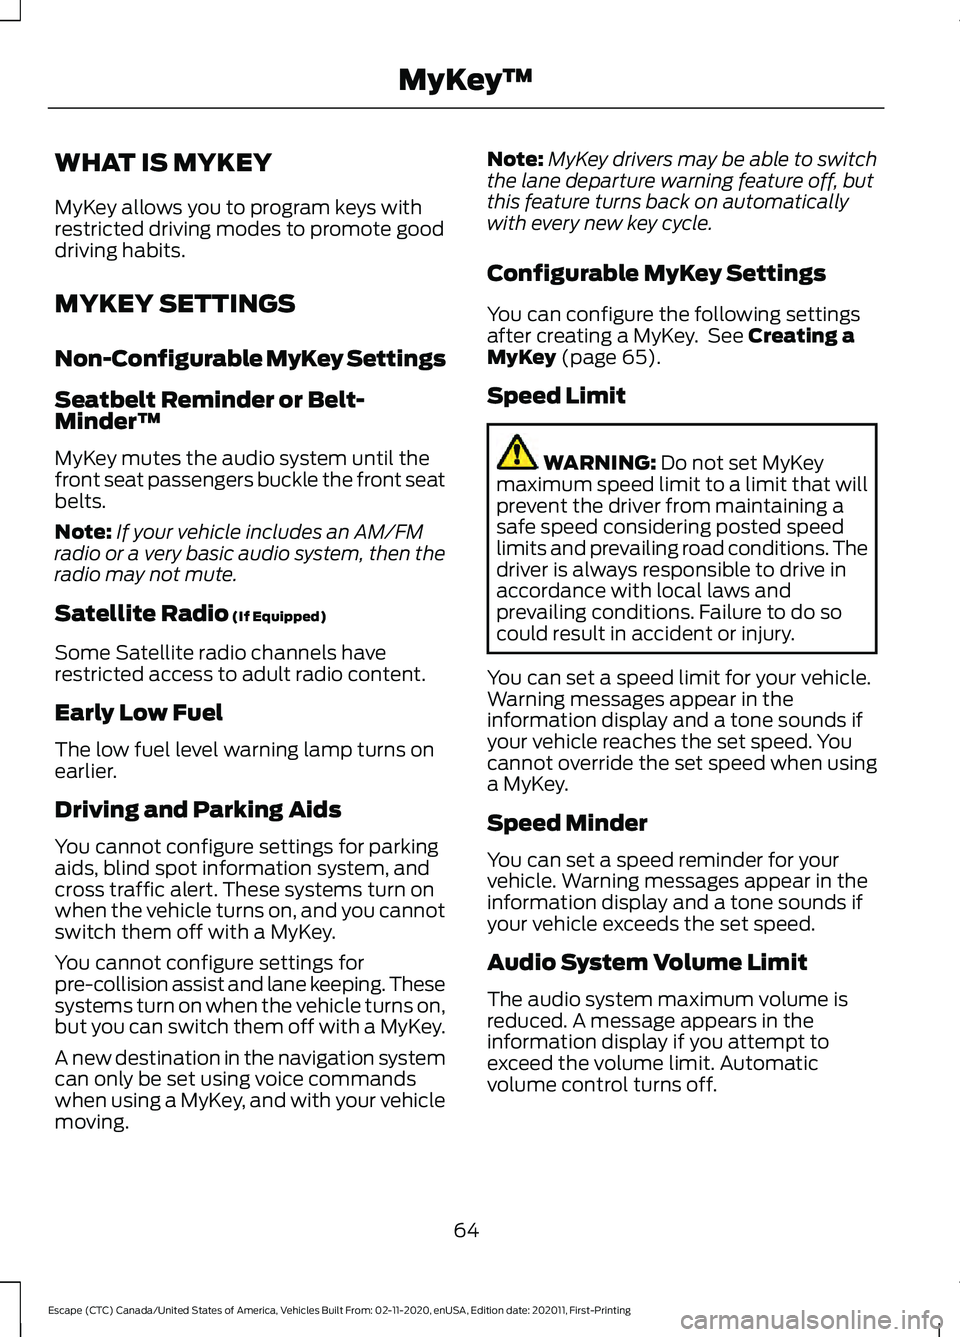 FORD ESCAPE 2021  Owners Manual WHAT IS MYKEY
MyKey allows you to program keys with
restricted driving modes to promote good
driving habits.
MYKEY SETTINGS
Non-Configurable MyKey Settings
Seatbelt Reminder or Belt-
Minder™
MyKey m